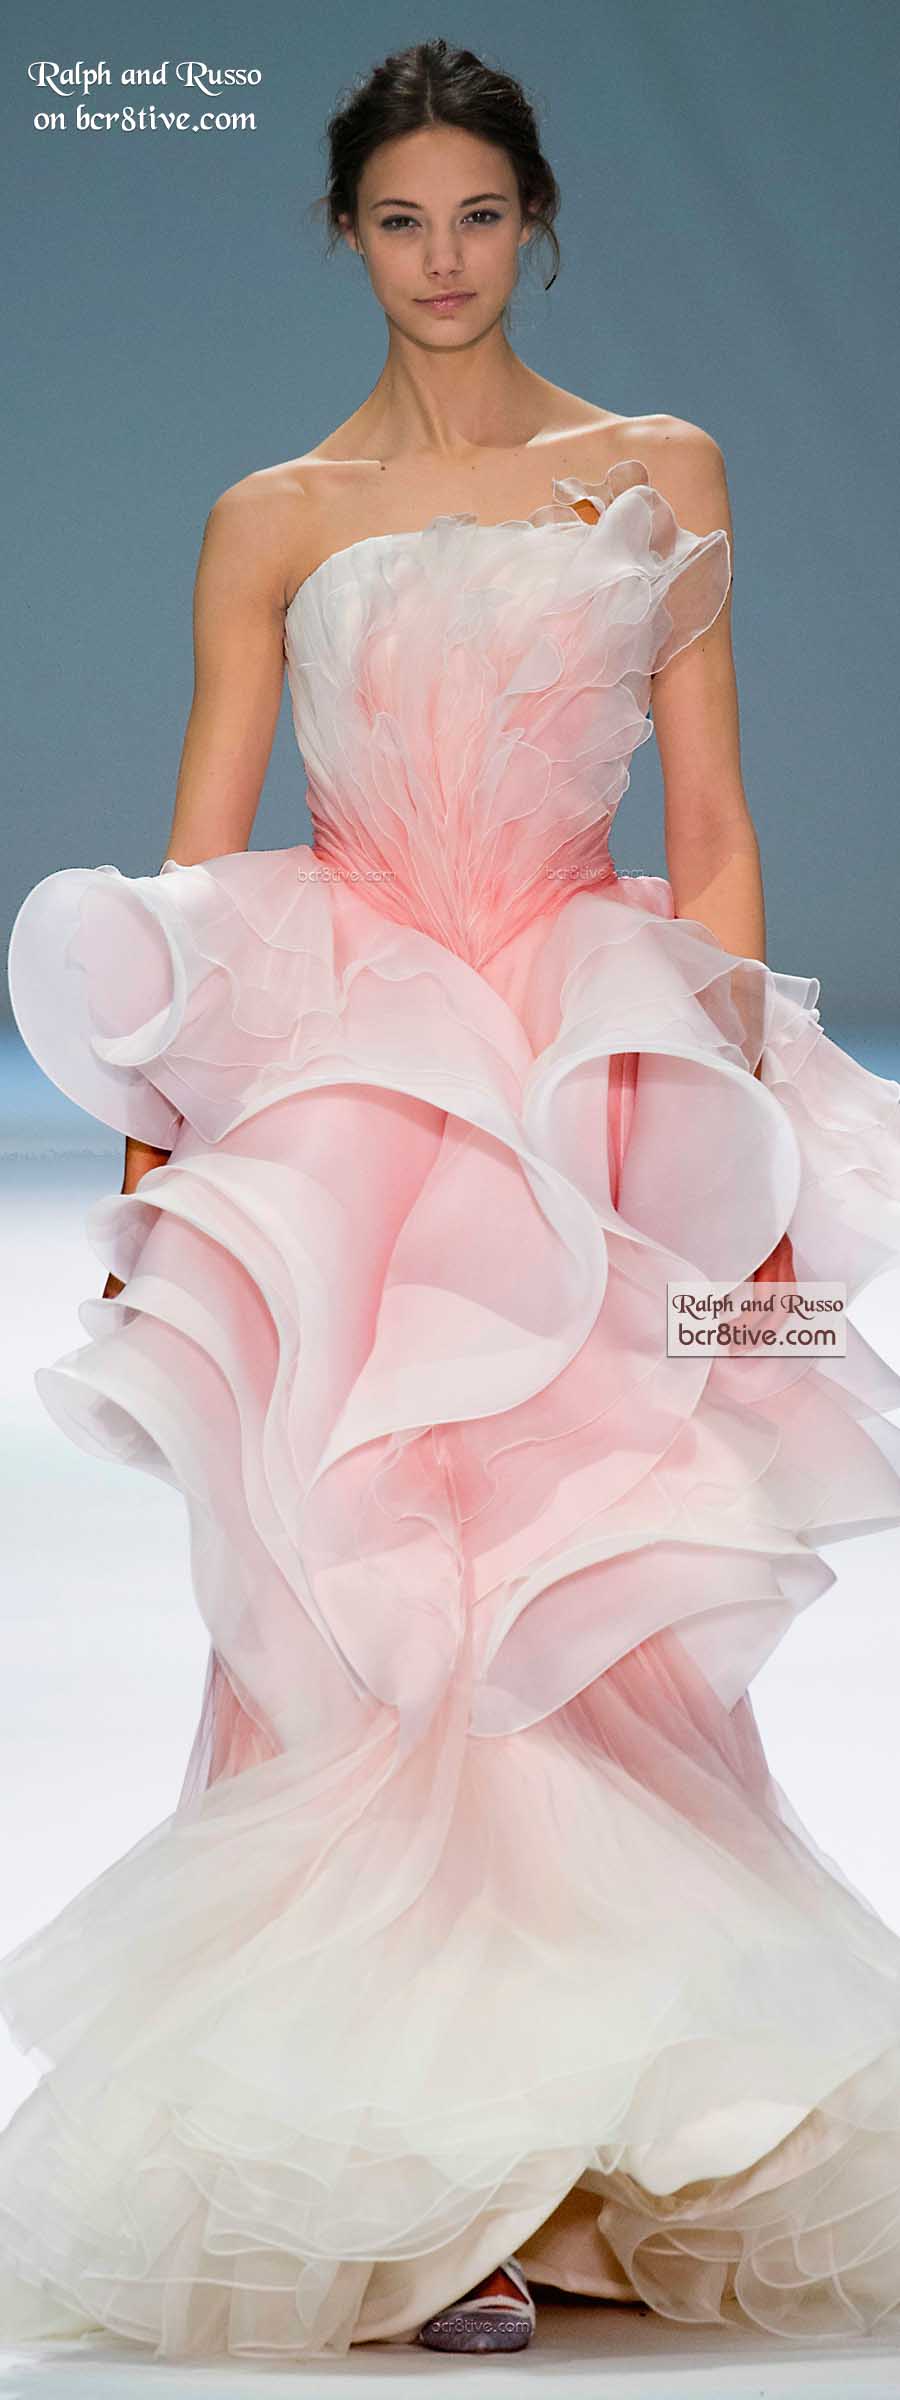 Ralph & Russo Spring 2015 Couture